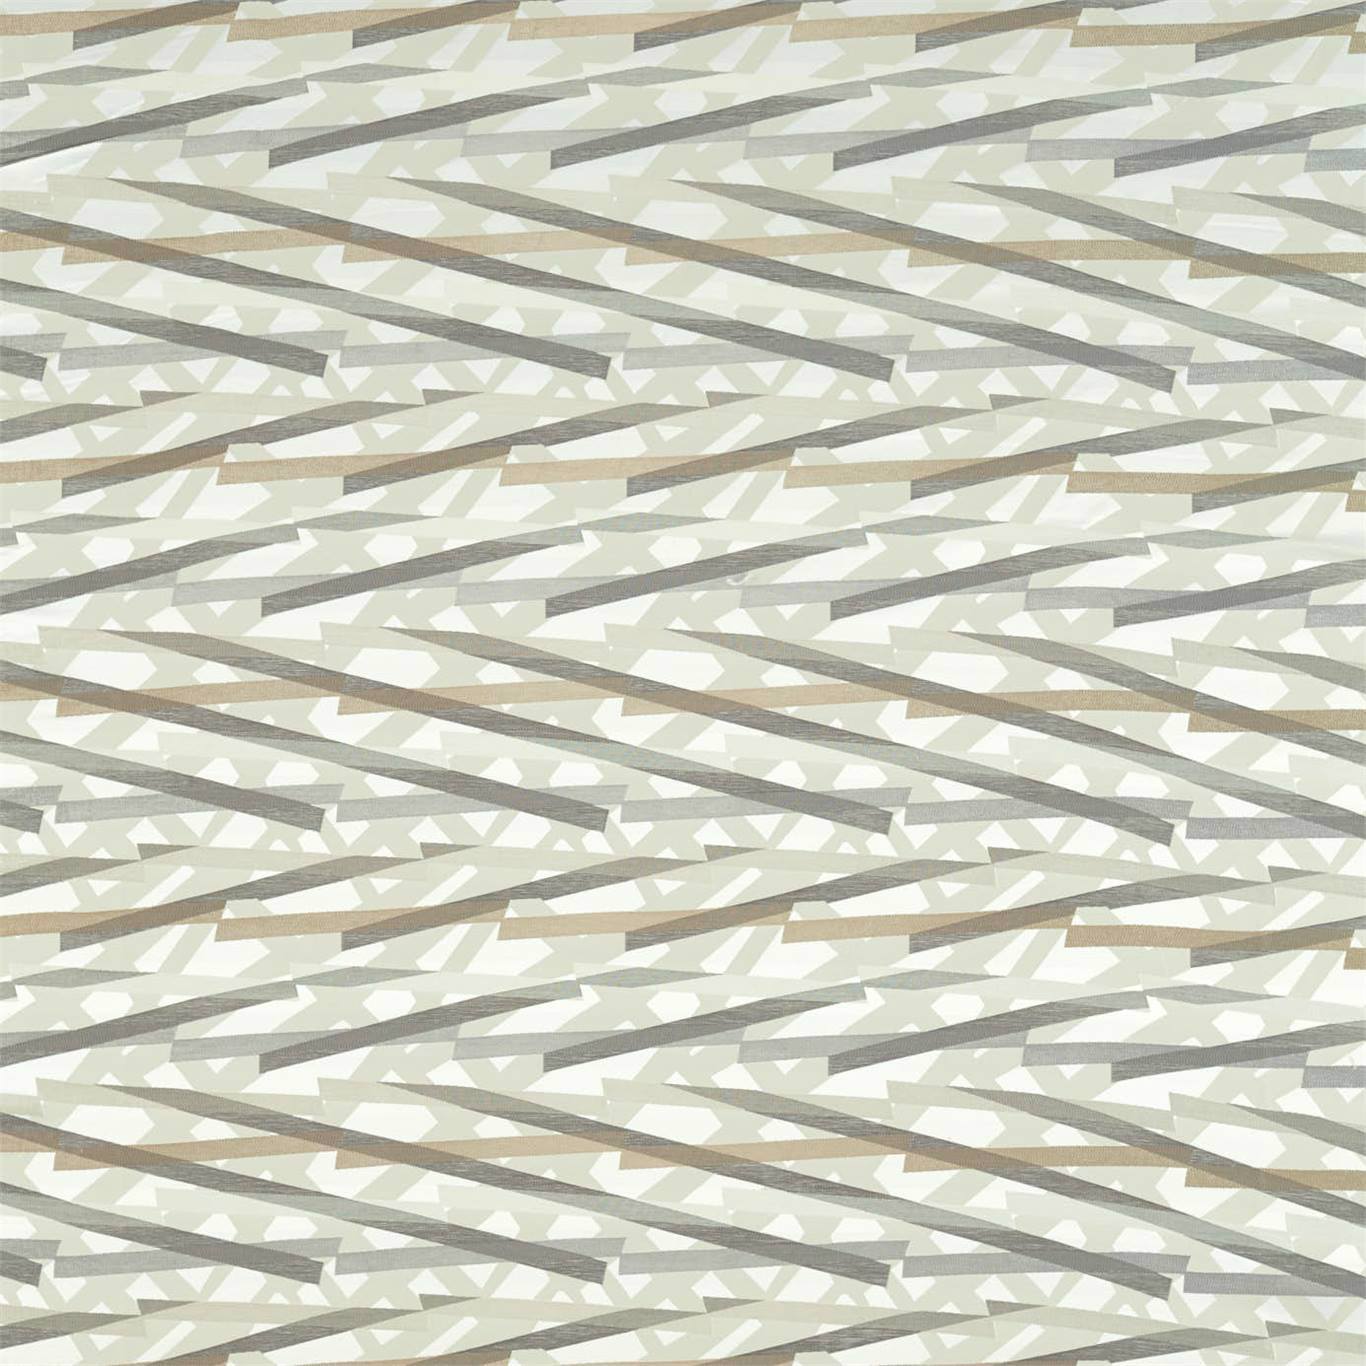 Diffinity Fabric by Harlequin - HMMF133018 - Oyster/Pumice